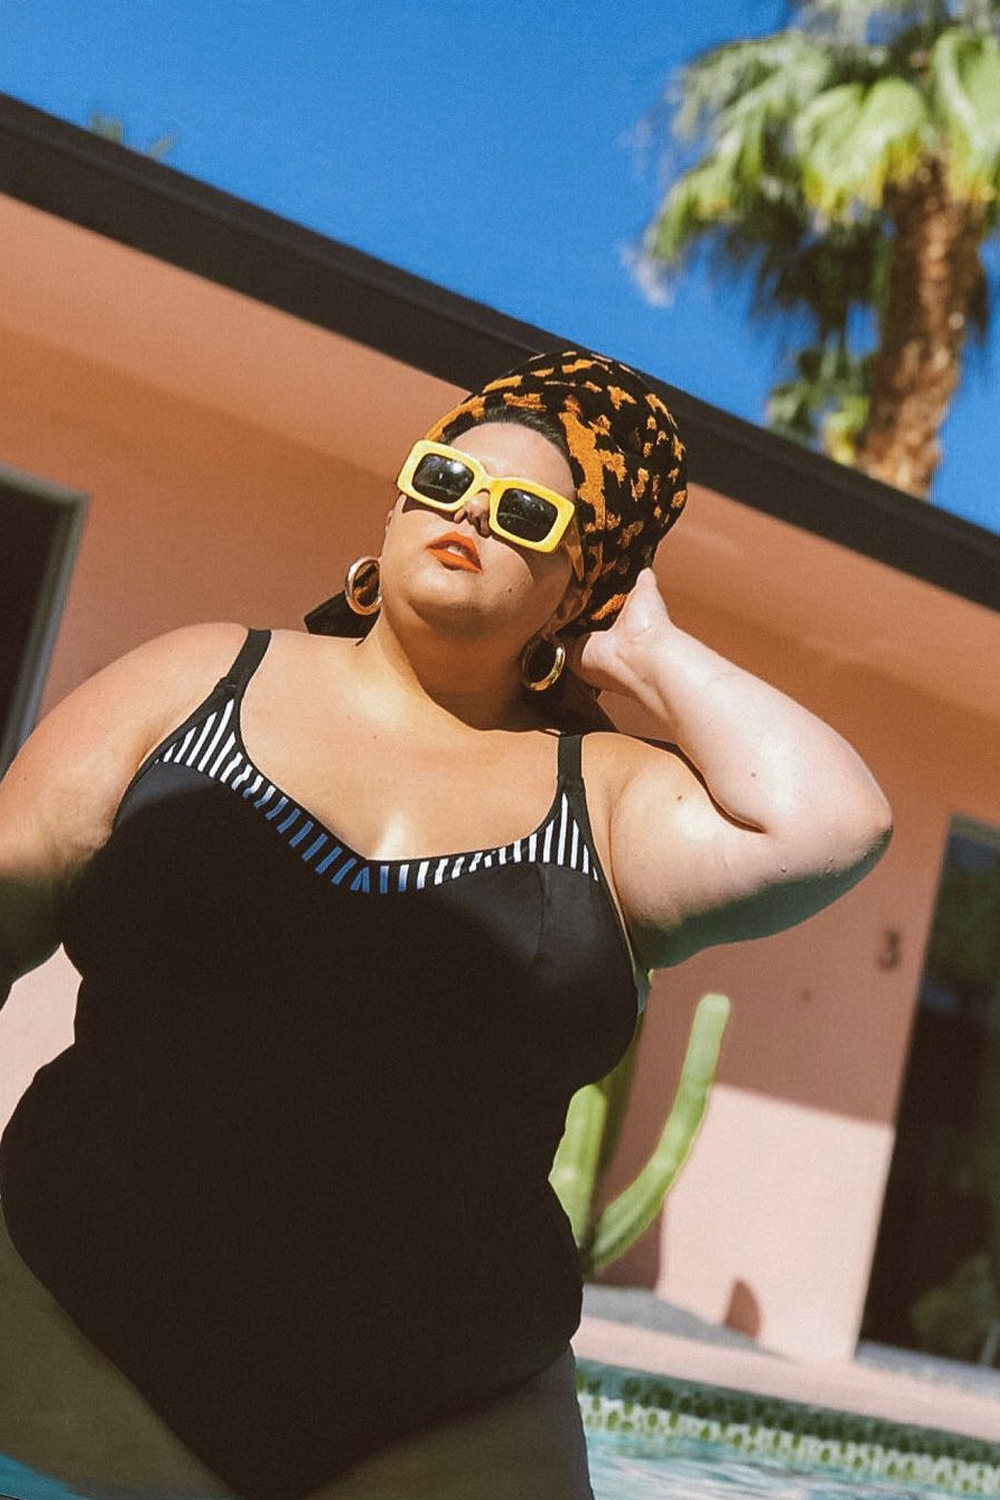 best swimwear brands for big boobs: Callie Thorpe in a monochrome swimsuit